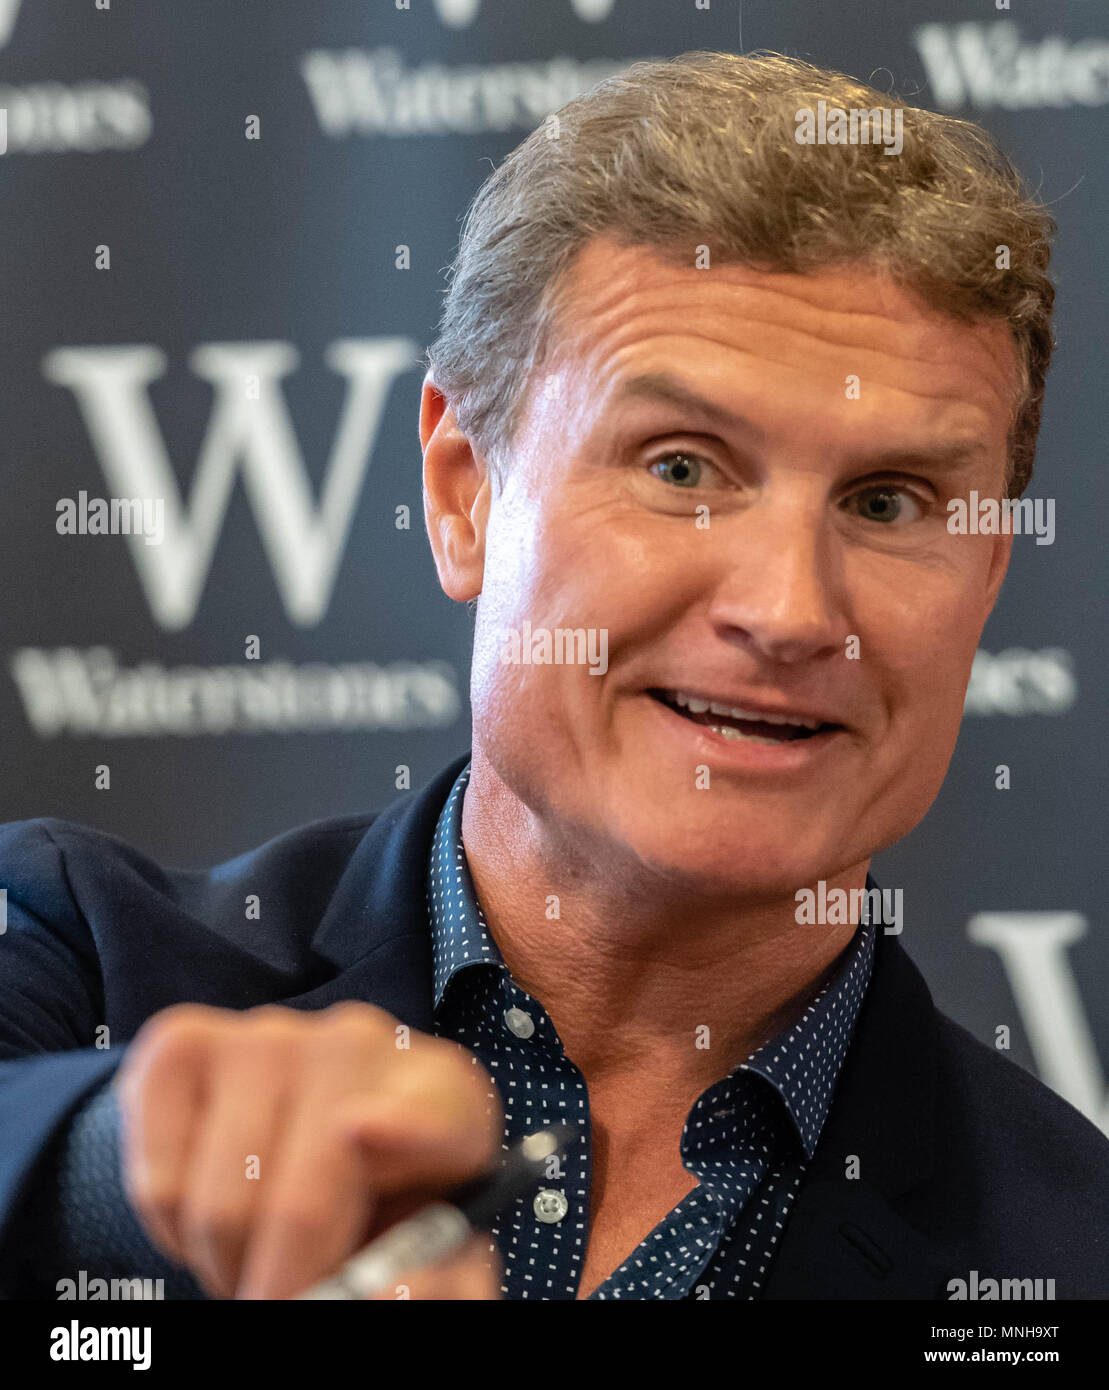 London 17th May 2018 David Coulthard MBE a British former Formula One racing driver turned presenter, commentator and journalist. He was runner-up in the 2001 Formula One World Drivers' Championship, driving for McLaren.  He was signing copies of his new book “The Winning Formula at Waterstones, Leadenhall Market London Credit Ian Davidson/Alamy Live News Stock Photo